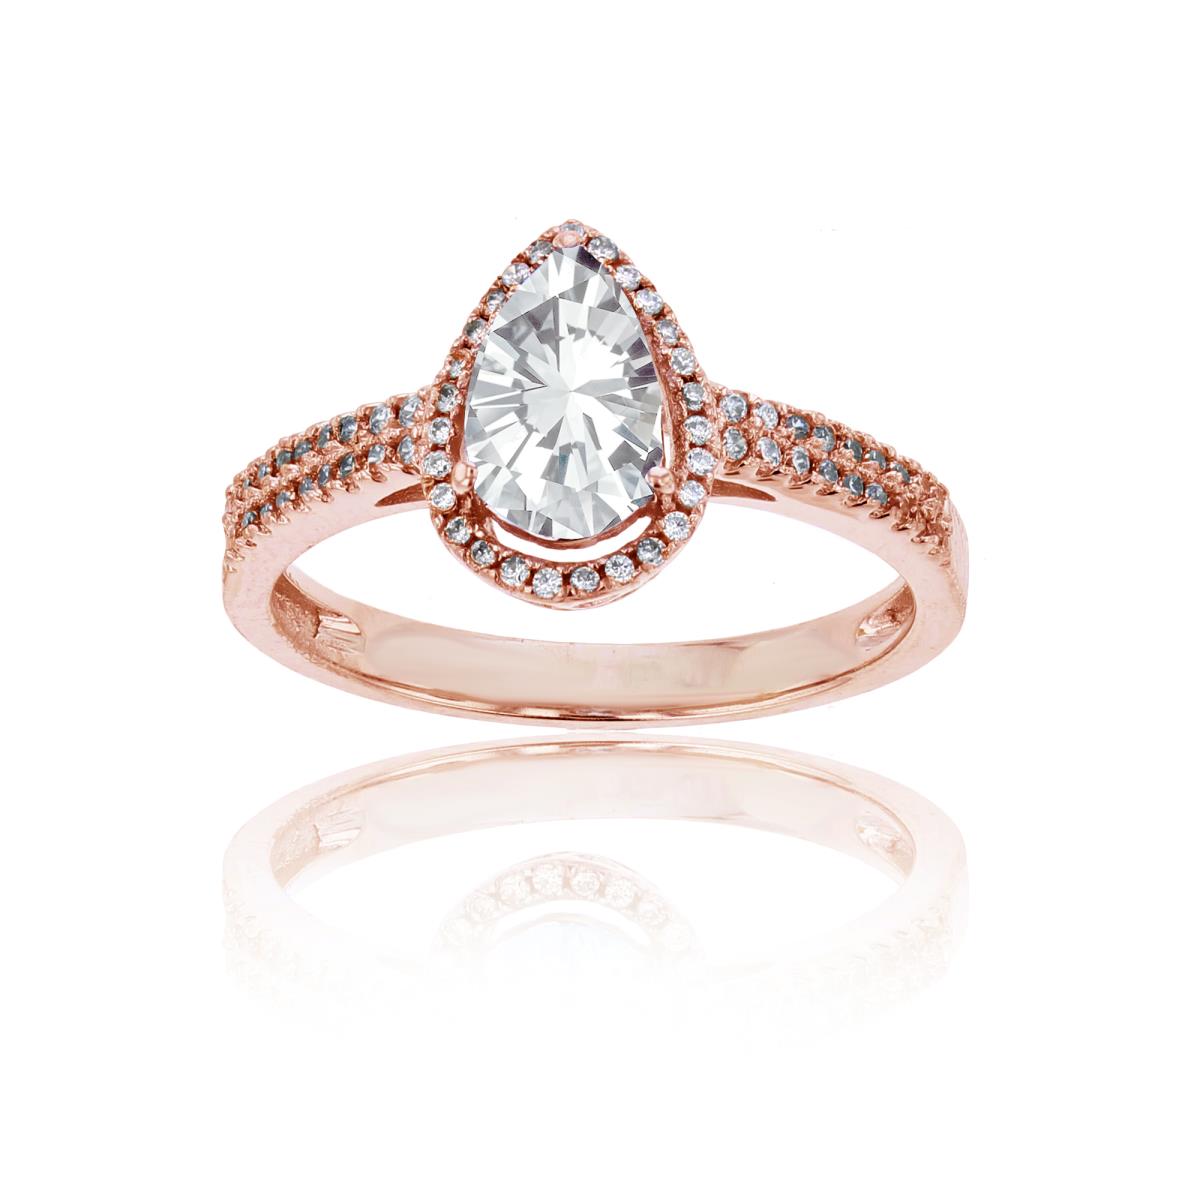 14K Rose Gold 0.20 CTTW Round Diamond & 8x5mm Pear Cut Created White Sapphire Halo Ring